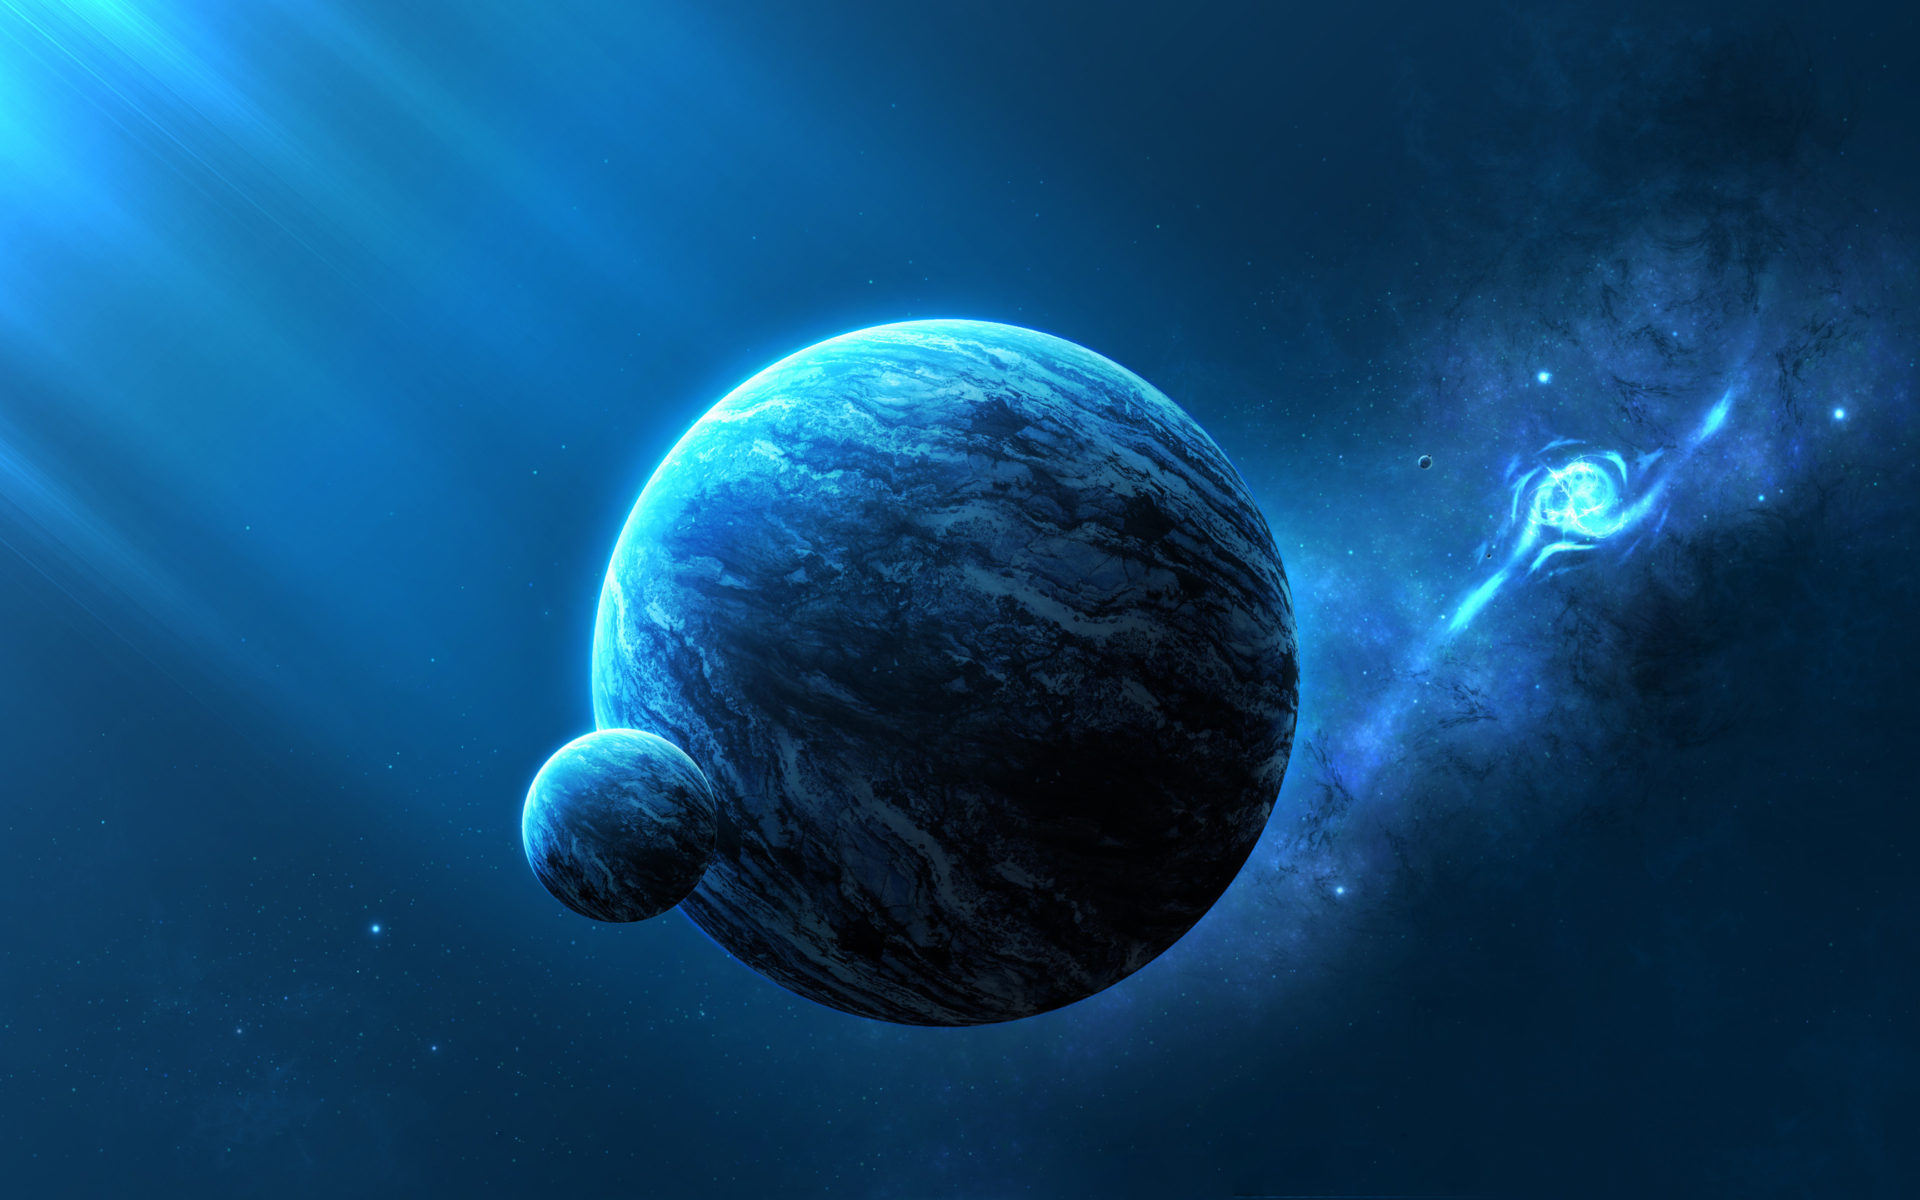 Space And The World Artwork Wallpapers